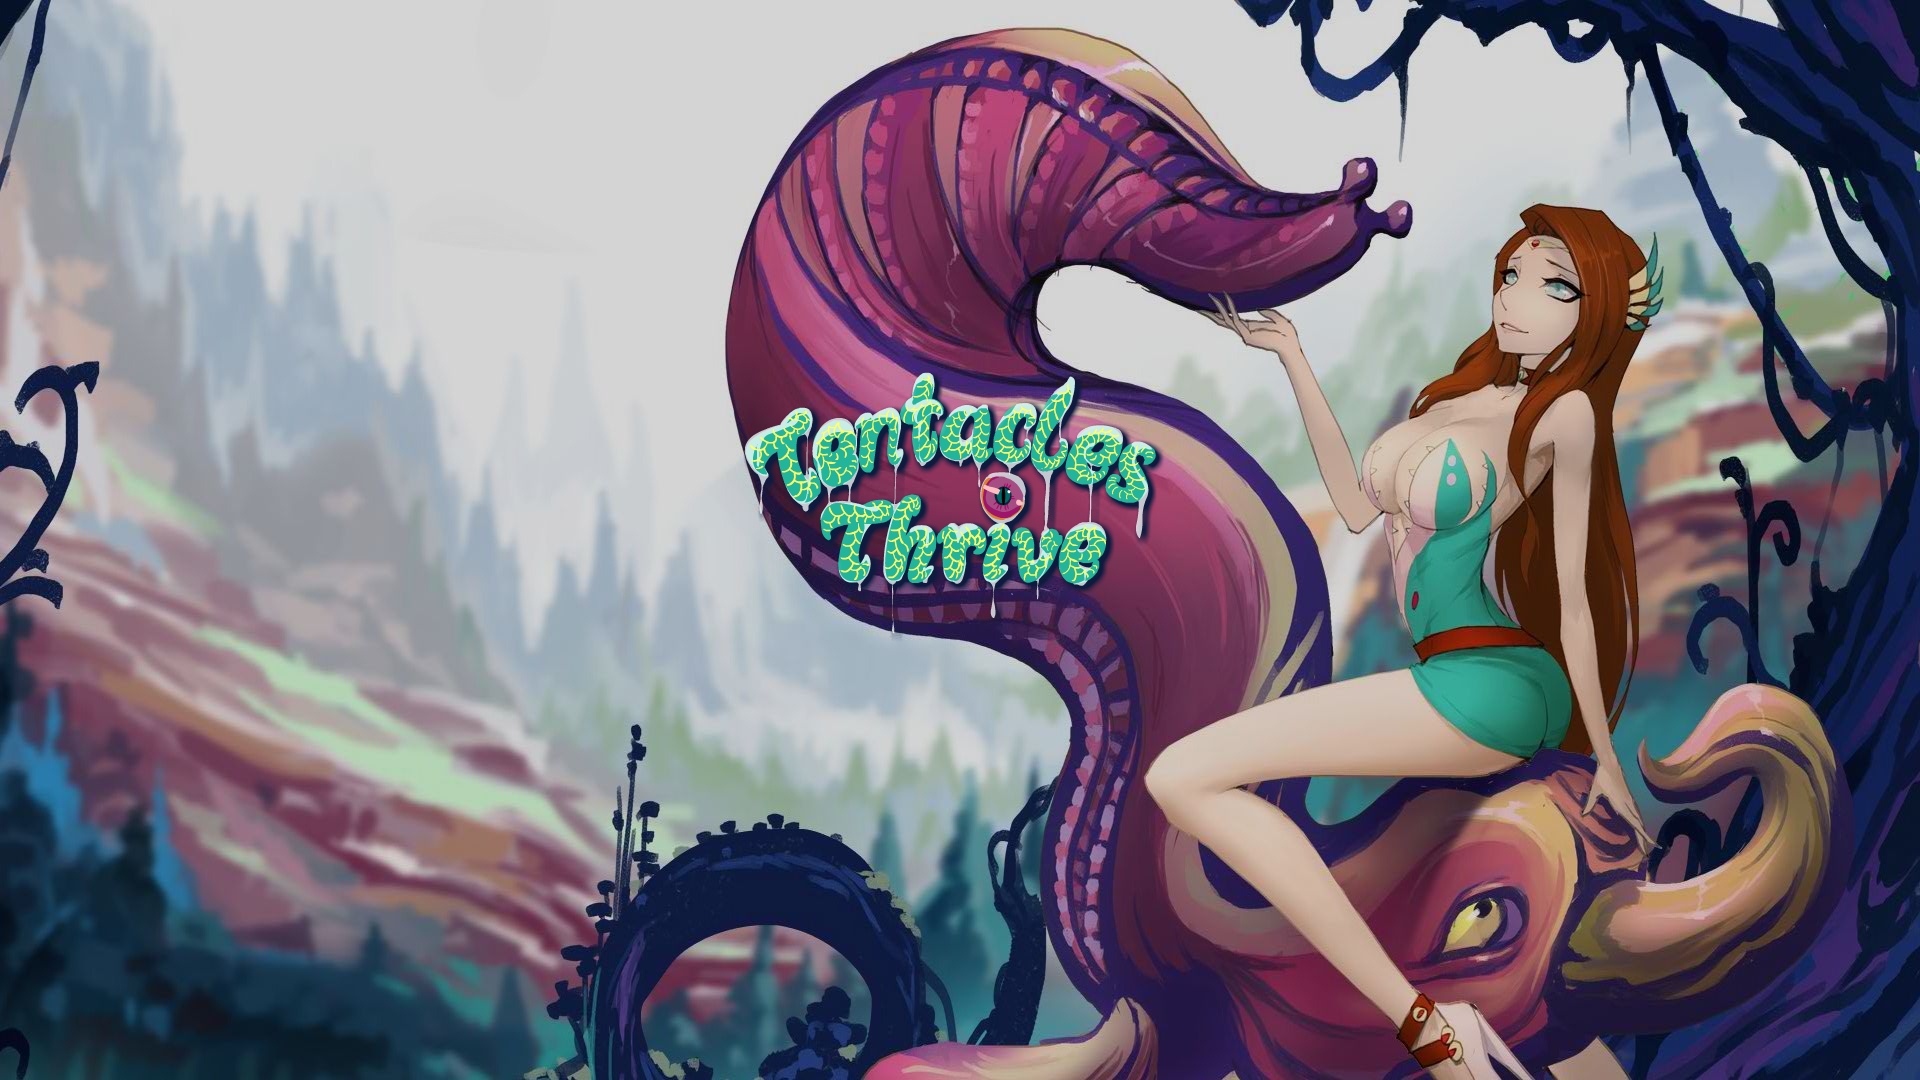 Tentacles thrive download